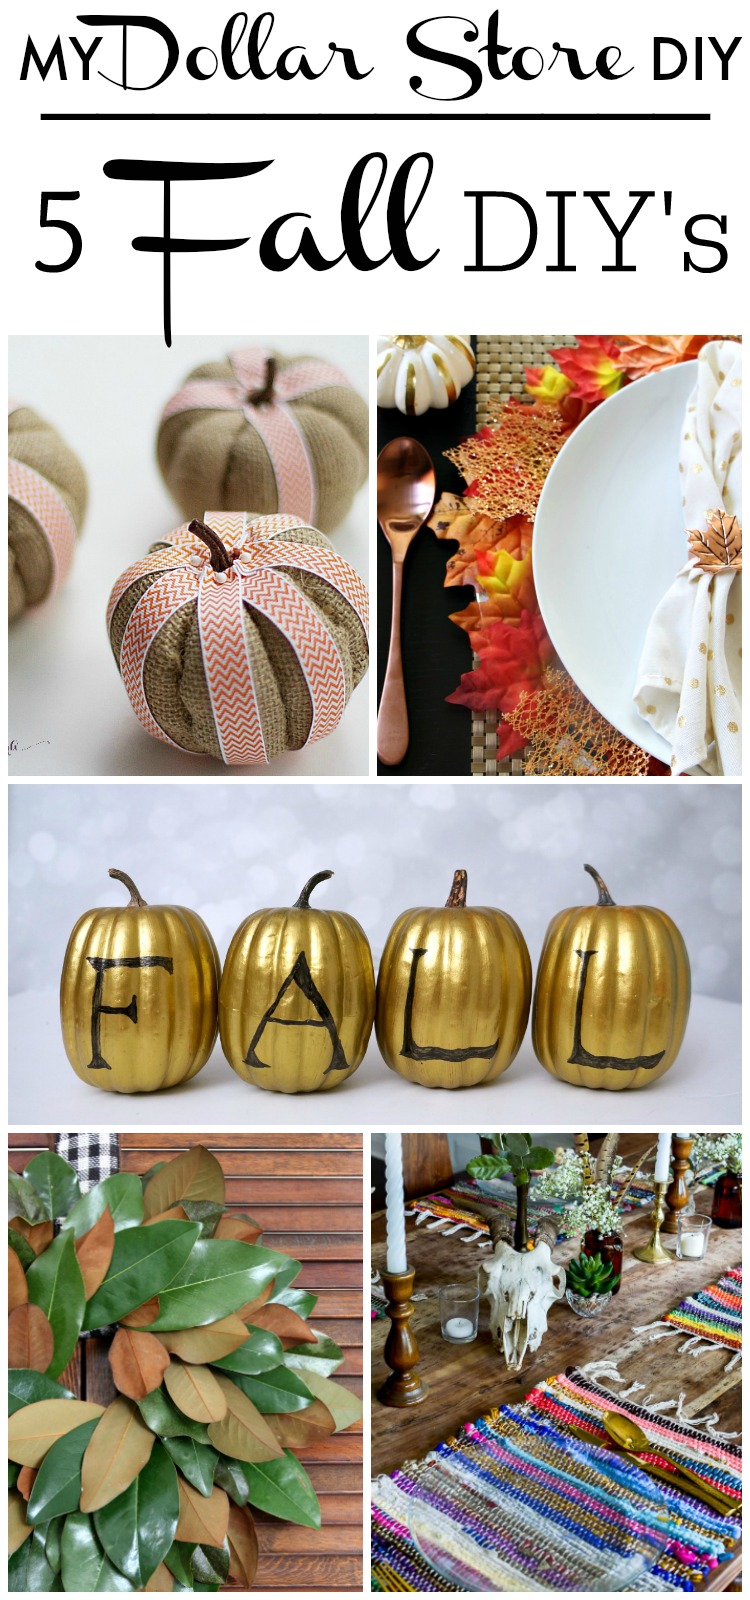 DIY Dollar Store Supply Projects for Fall